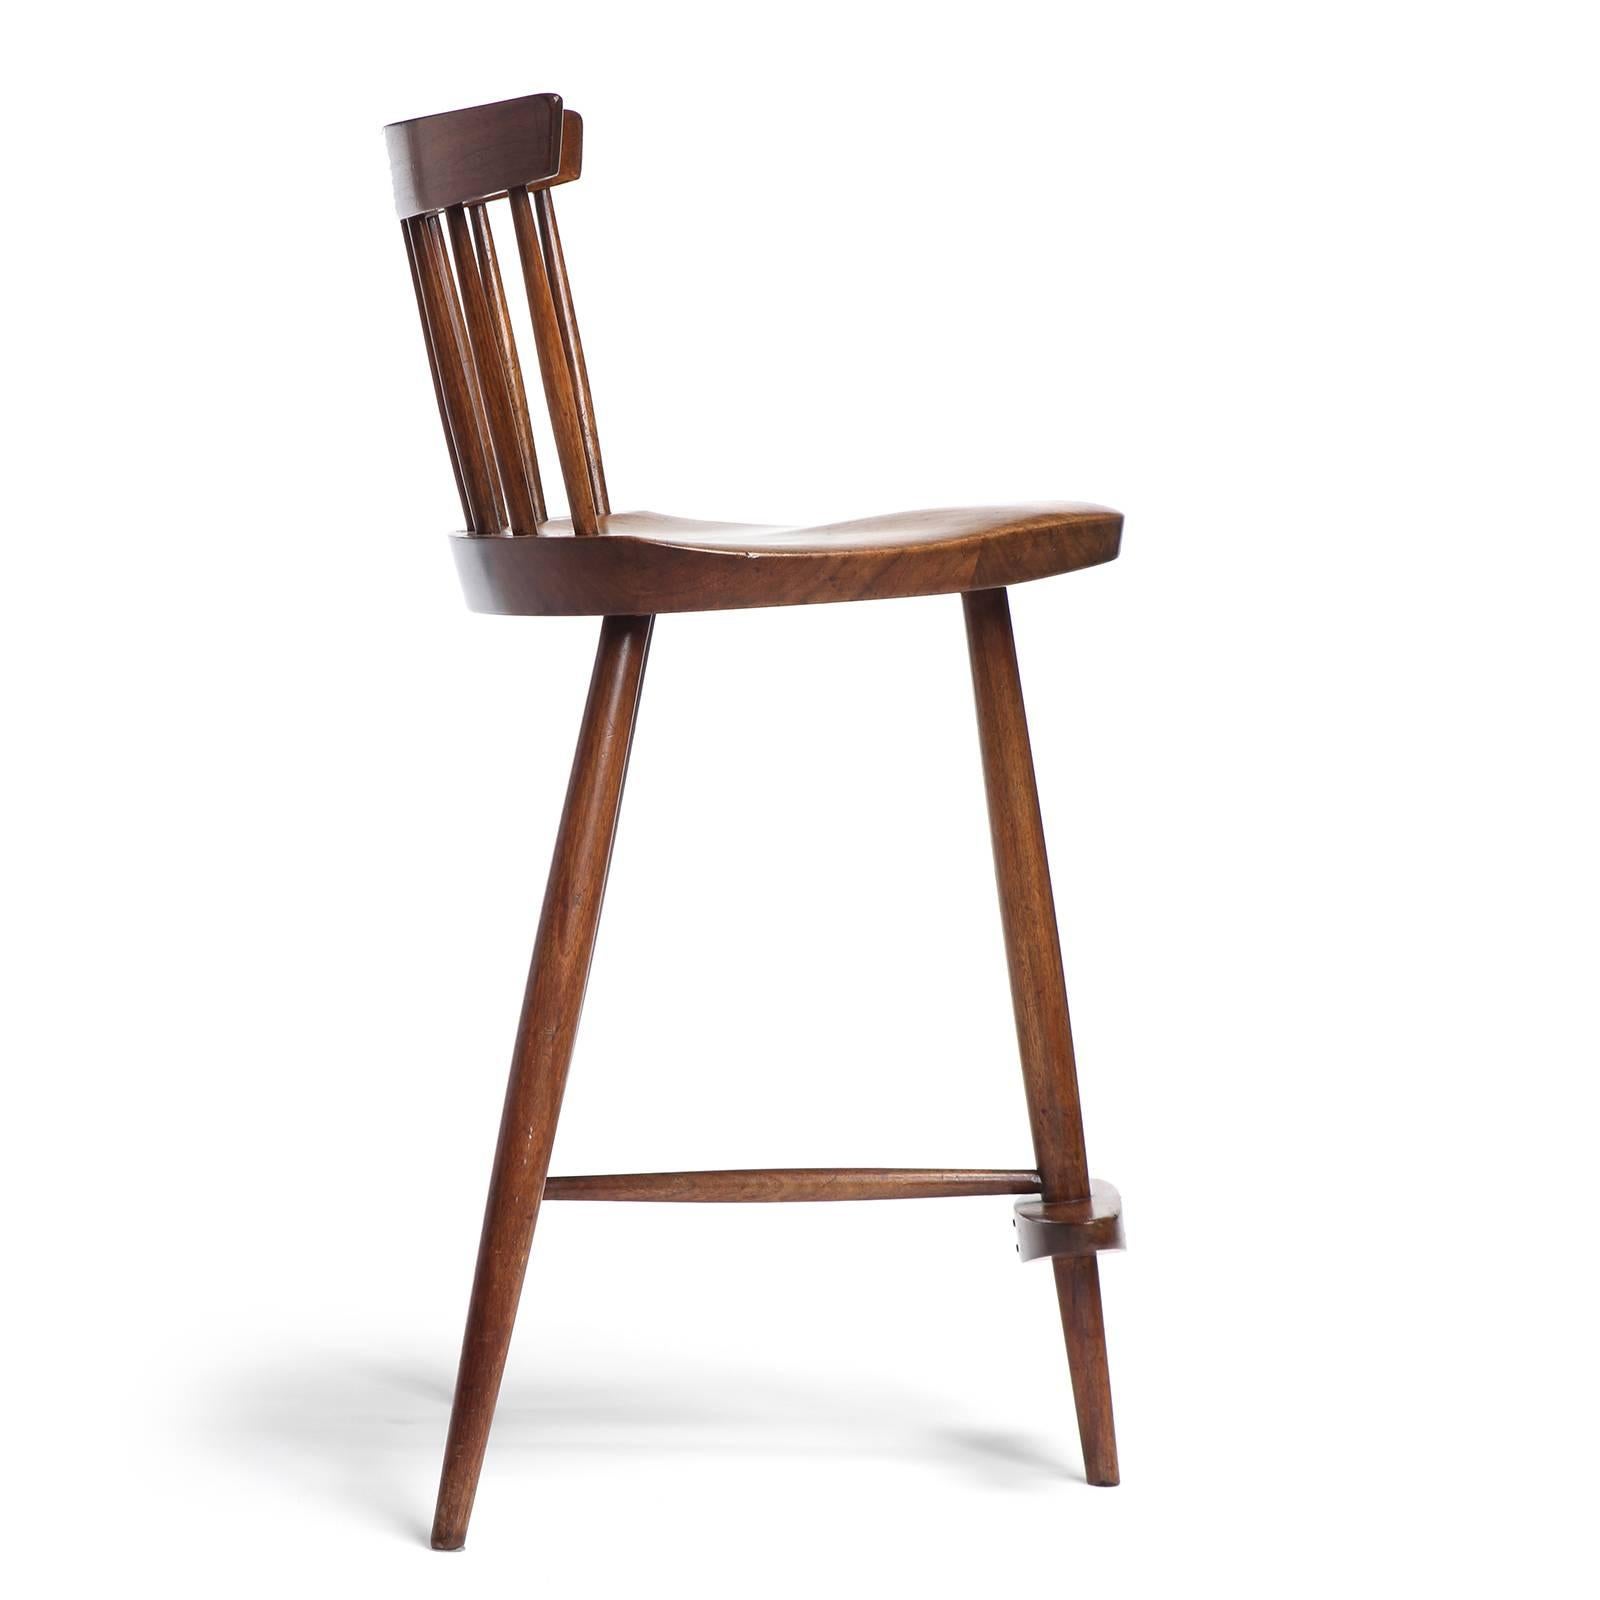 A bench-made walnut Mira stool by George Nakashima, father of the American Craft movement. The stool features hand-hewn spindles supporting a thin backrest and a shaped triangular seat on three tapered dowel legs with a central footrest.
Produced